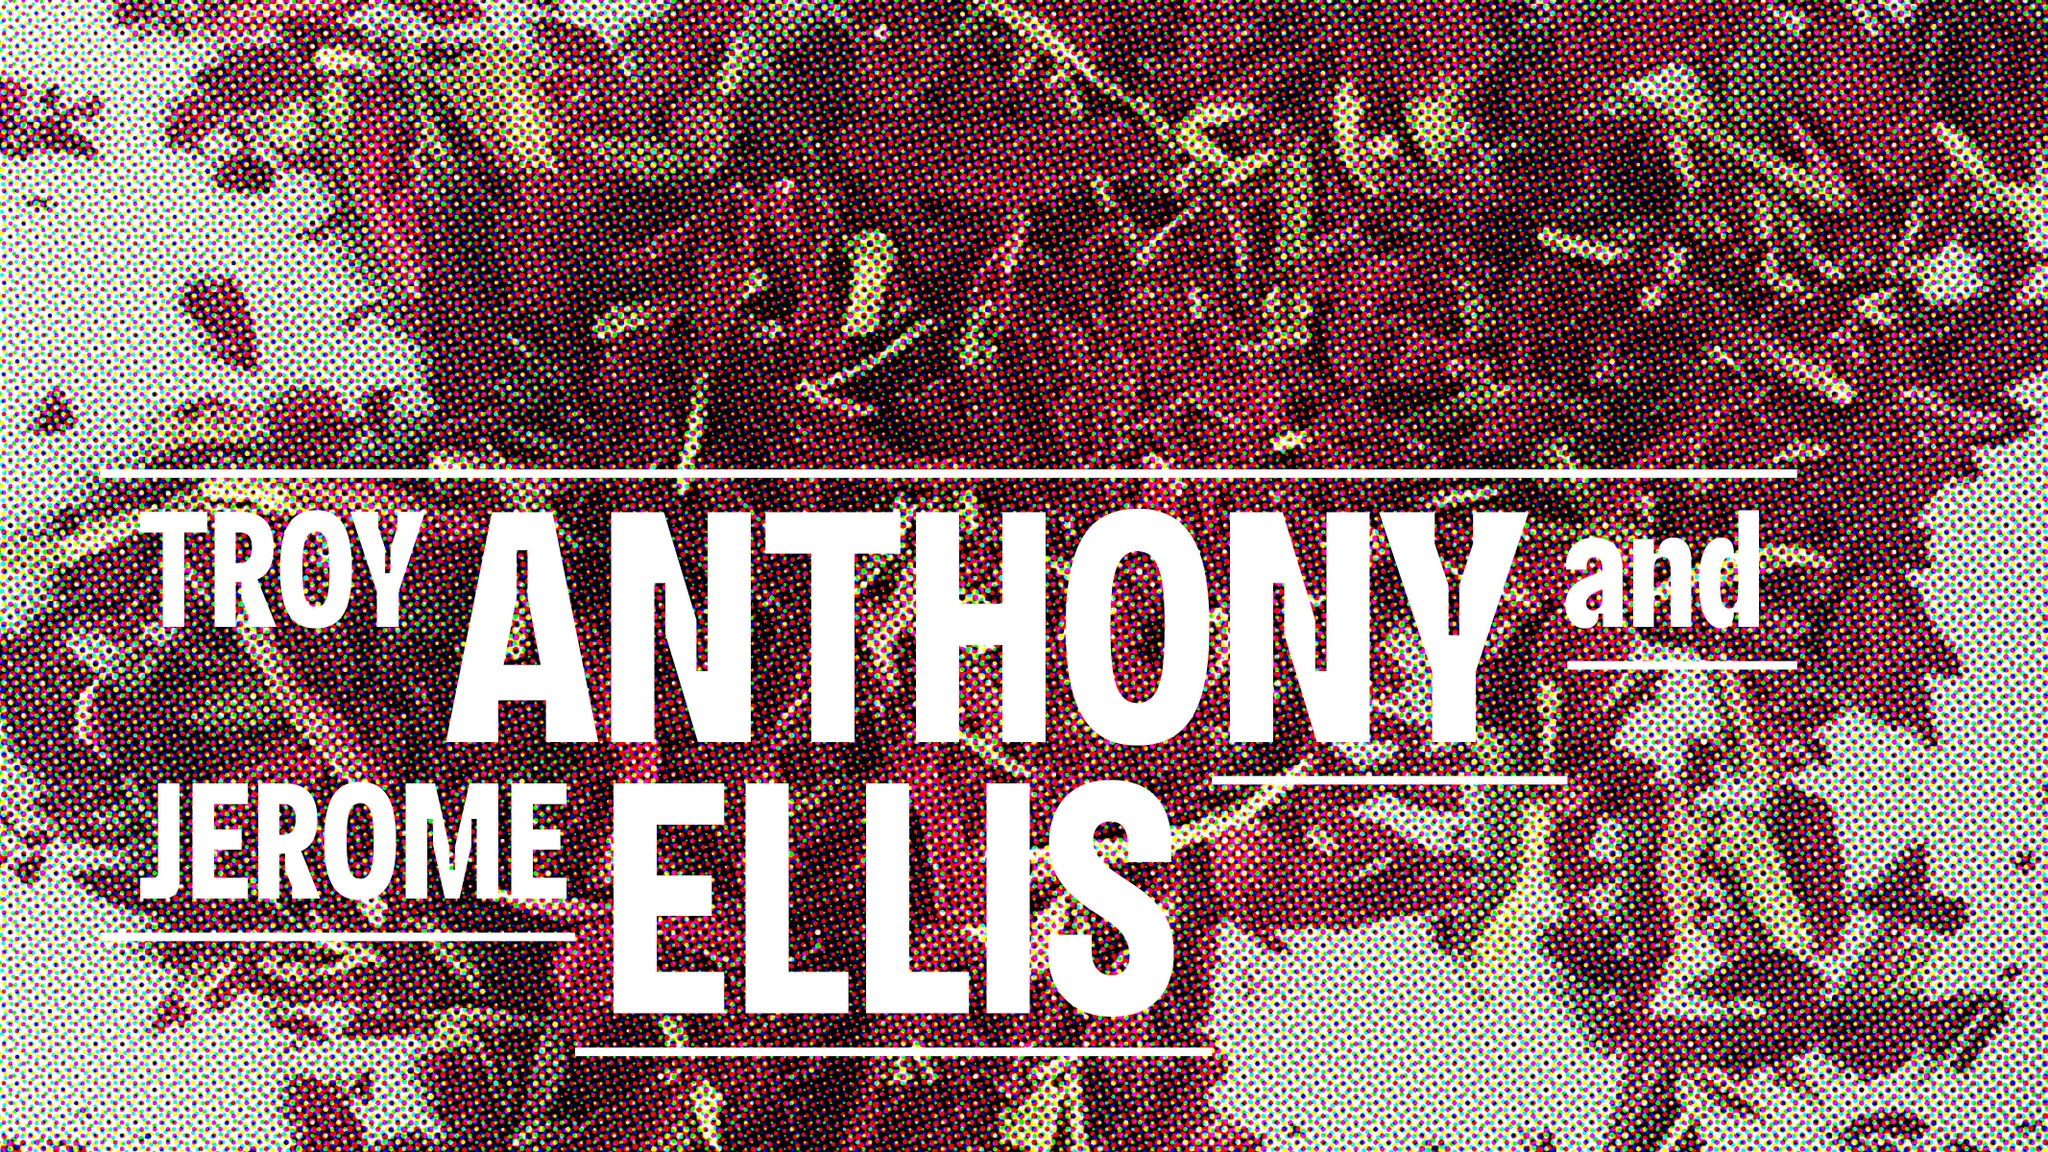 A pile of dried red flowers with light green stems covering a blank background with the names Troy Anthony and Jerome Ellis overlaid on the image